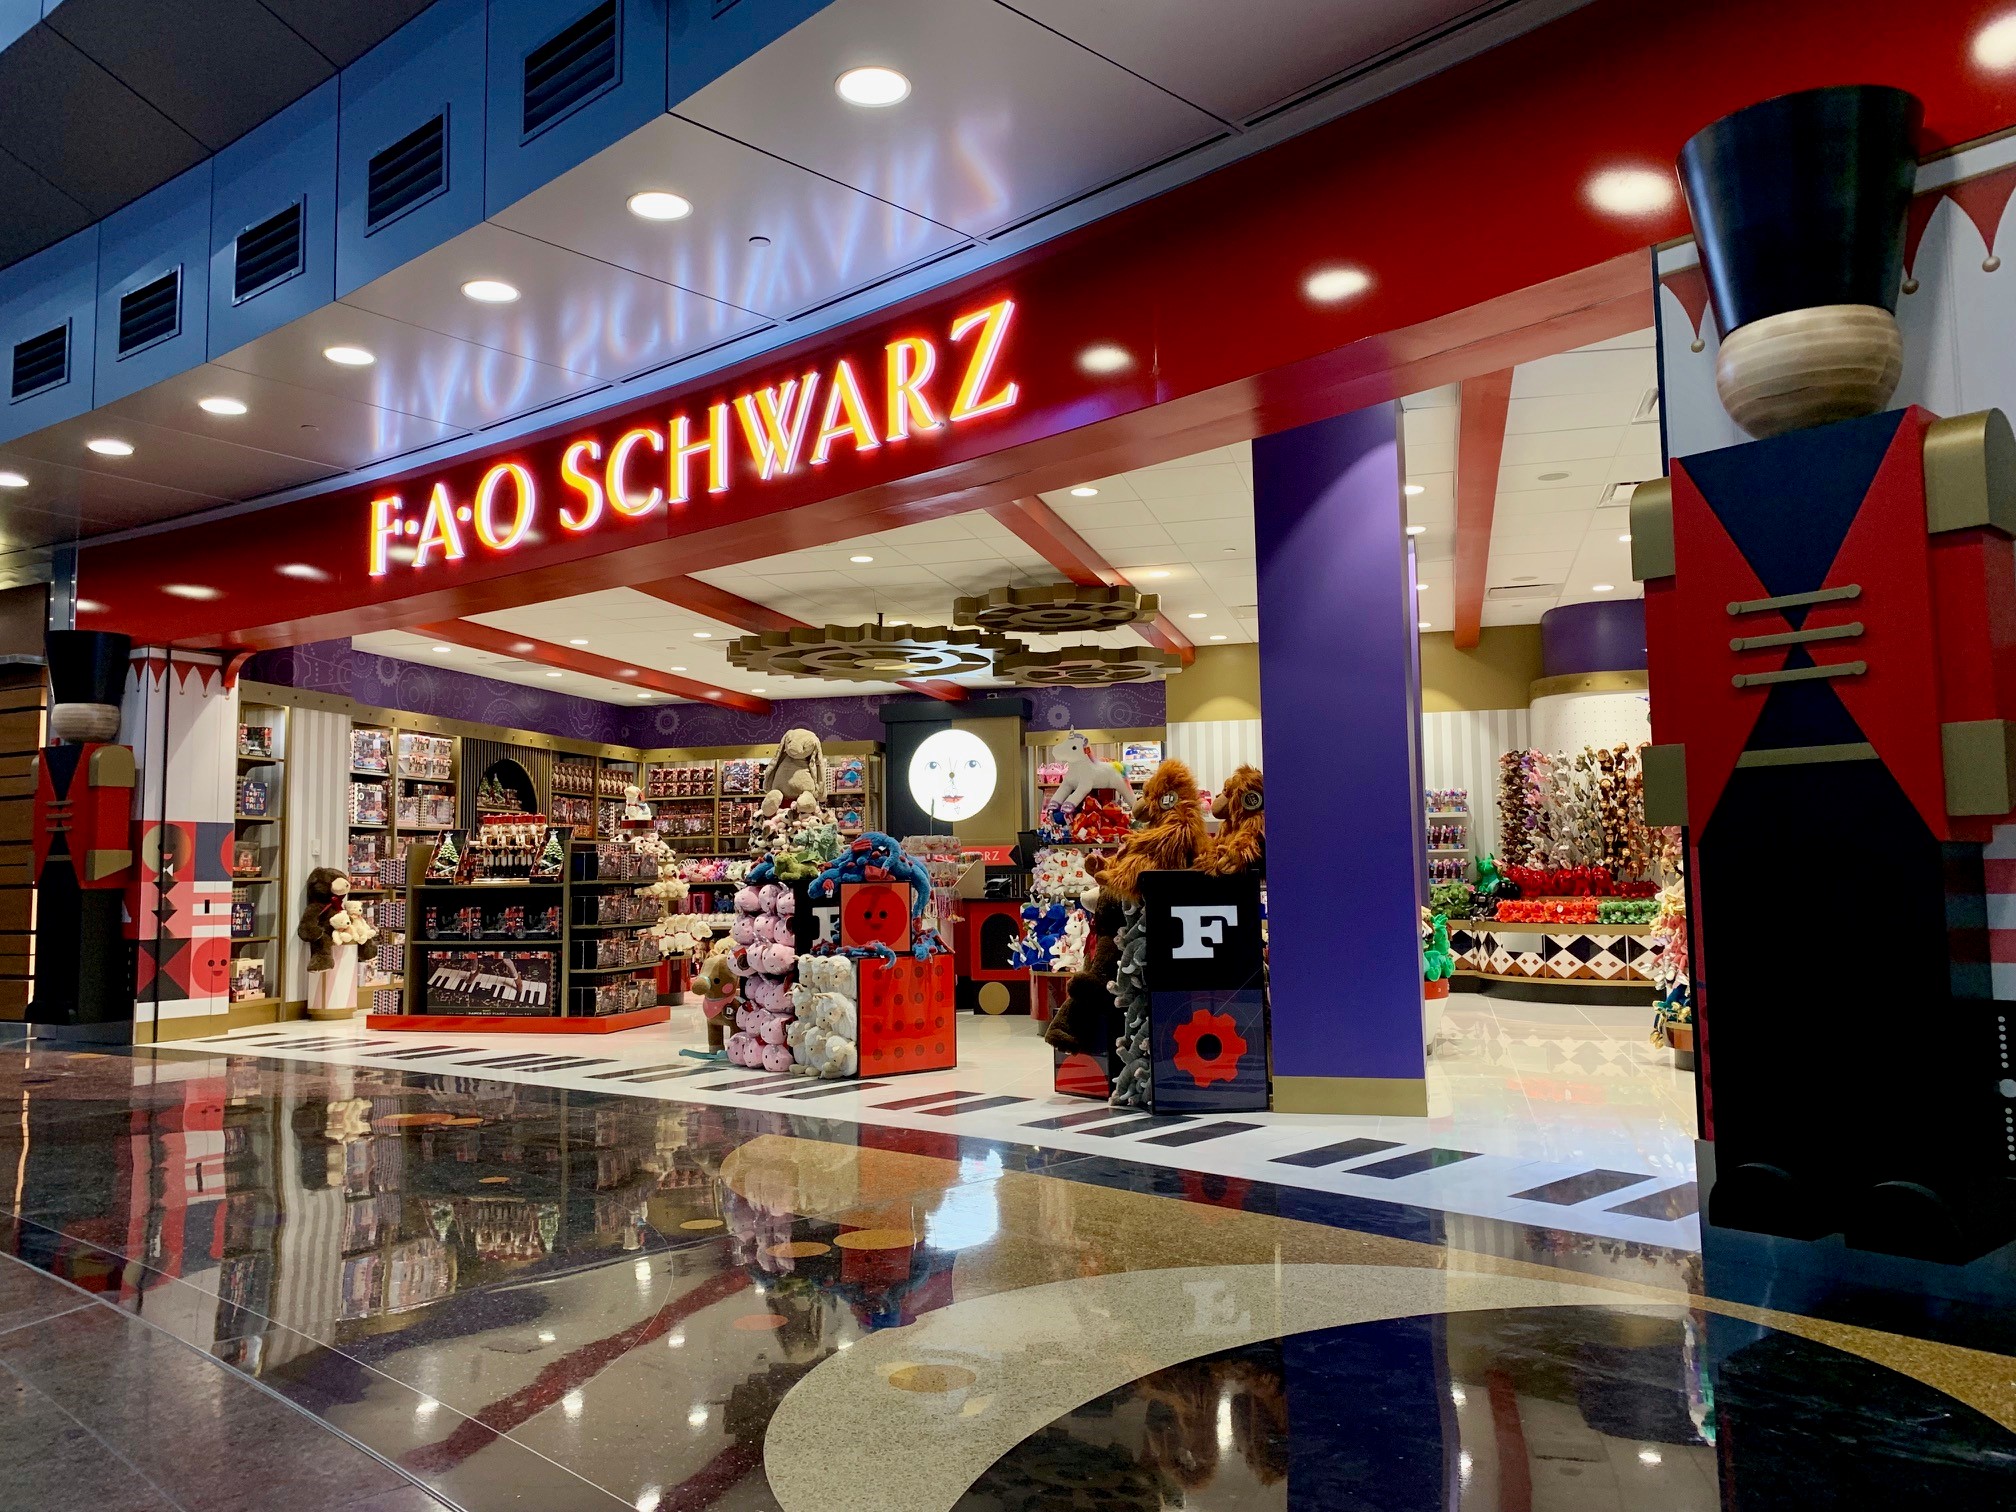 F.A.O Schwarz retail storefront with large Toy soldier satues.